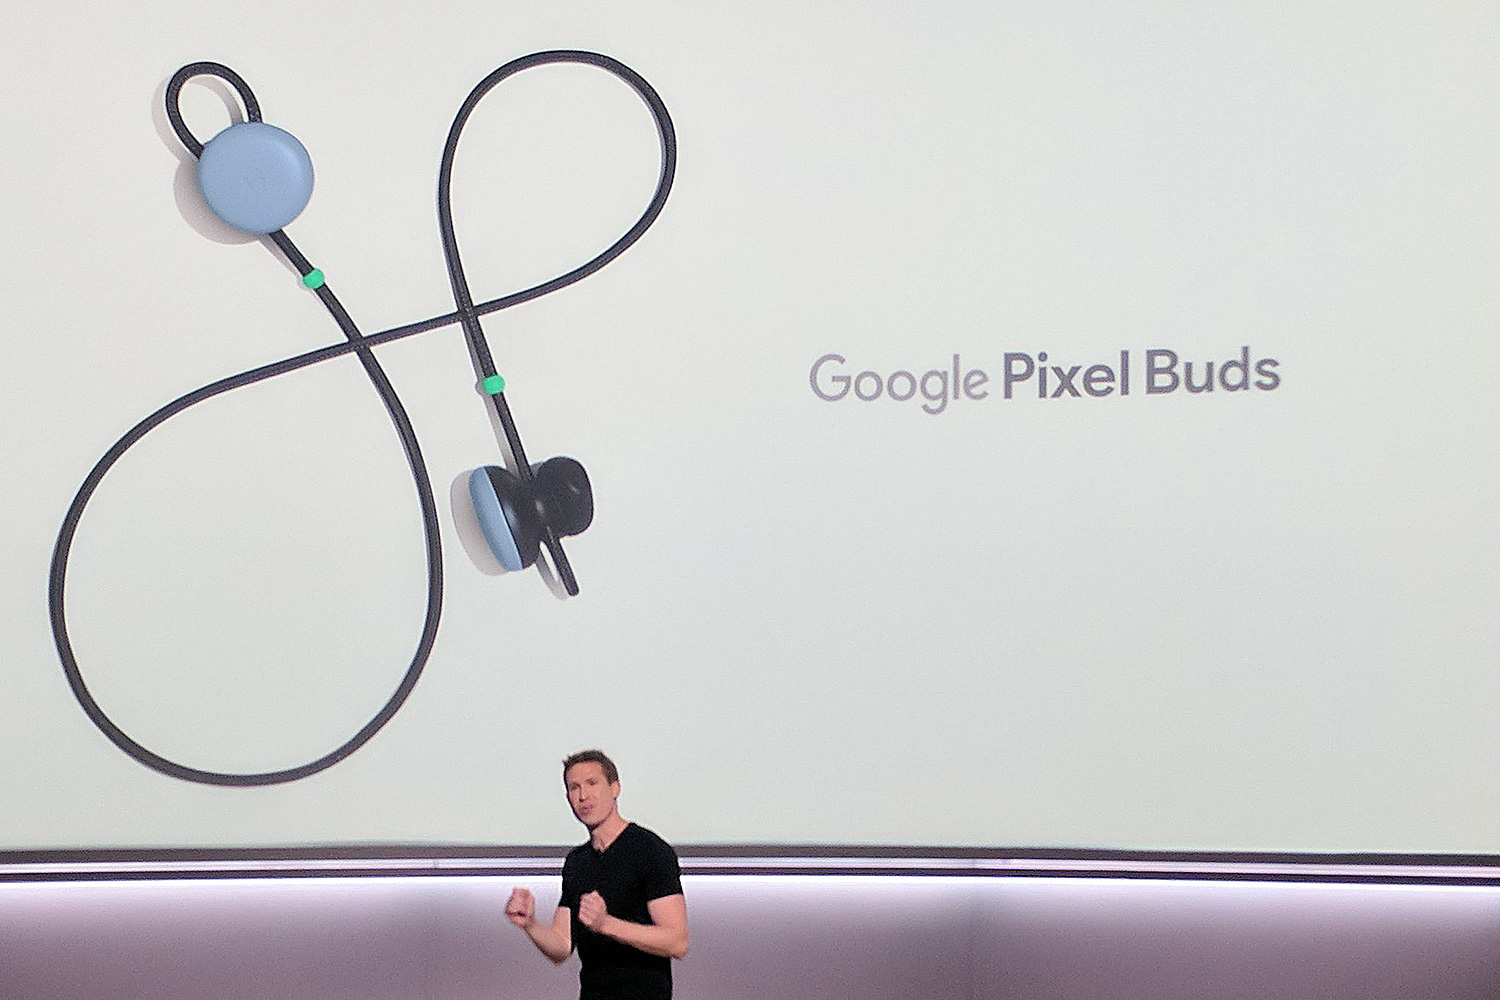 Google Pixel Buds product